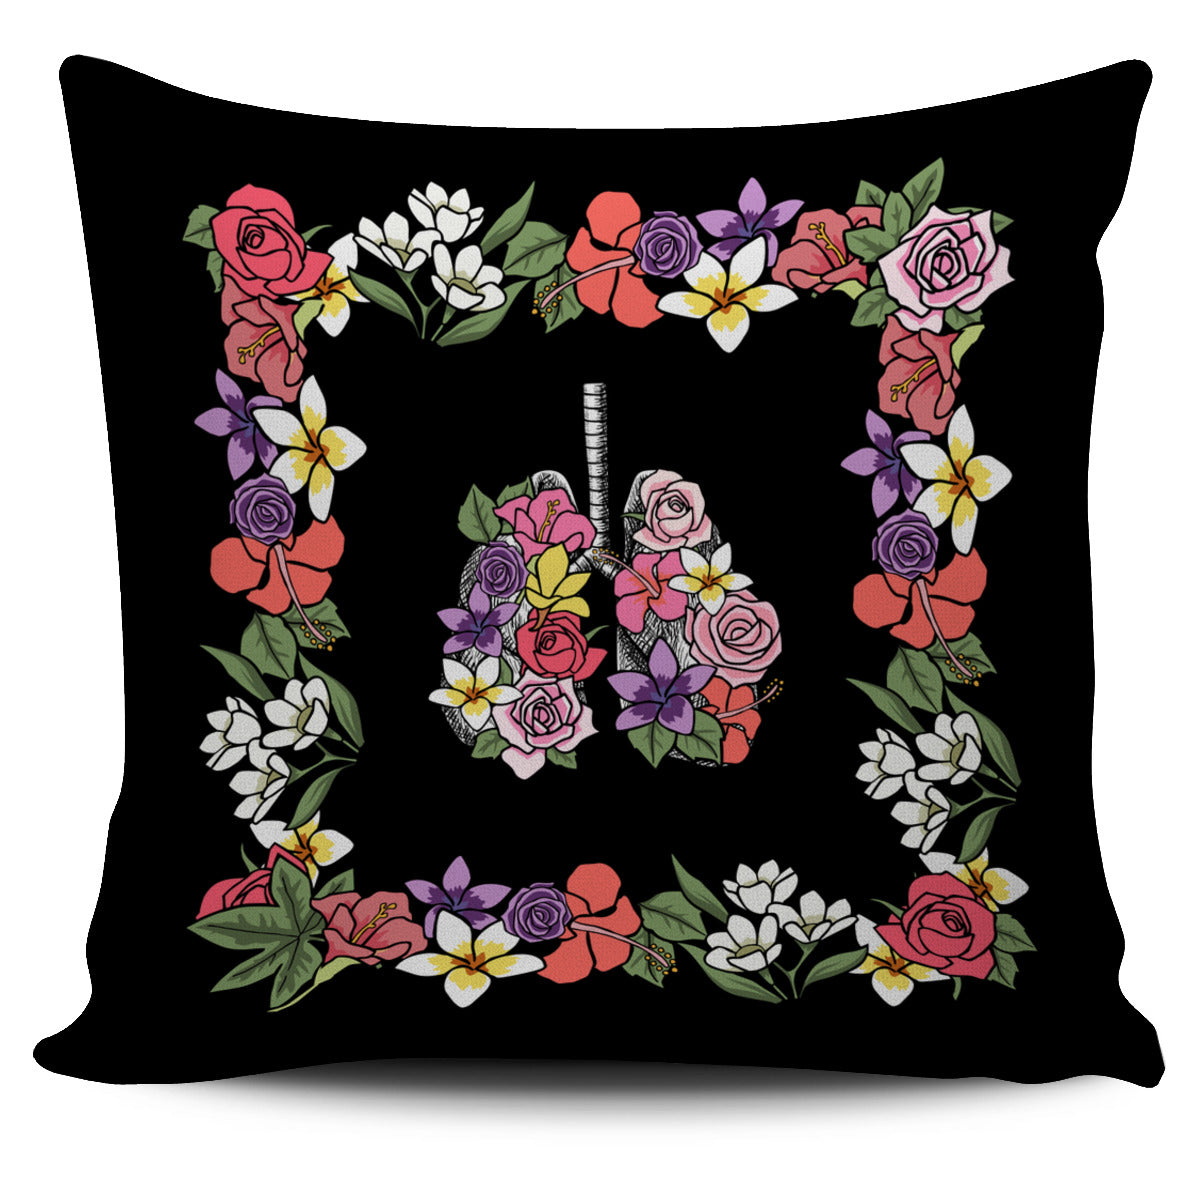 Floral Anatomy Lungs Pillow Cover